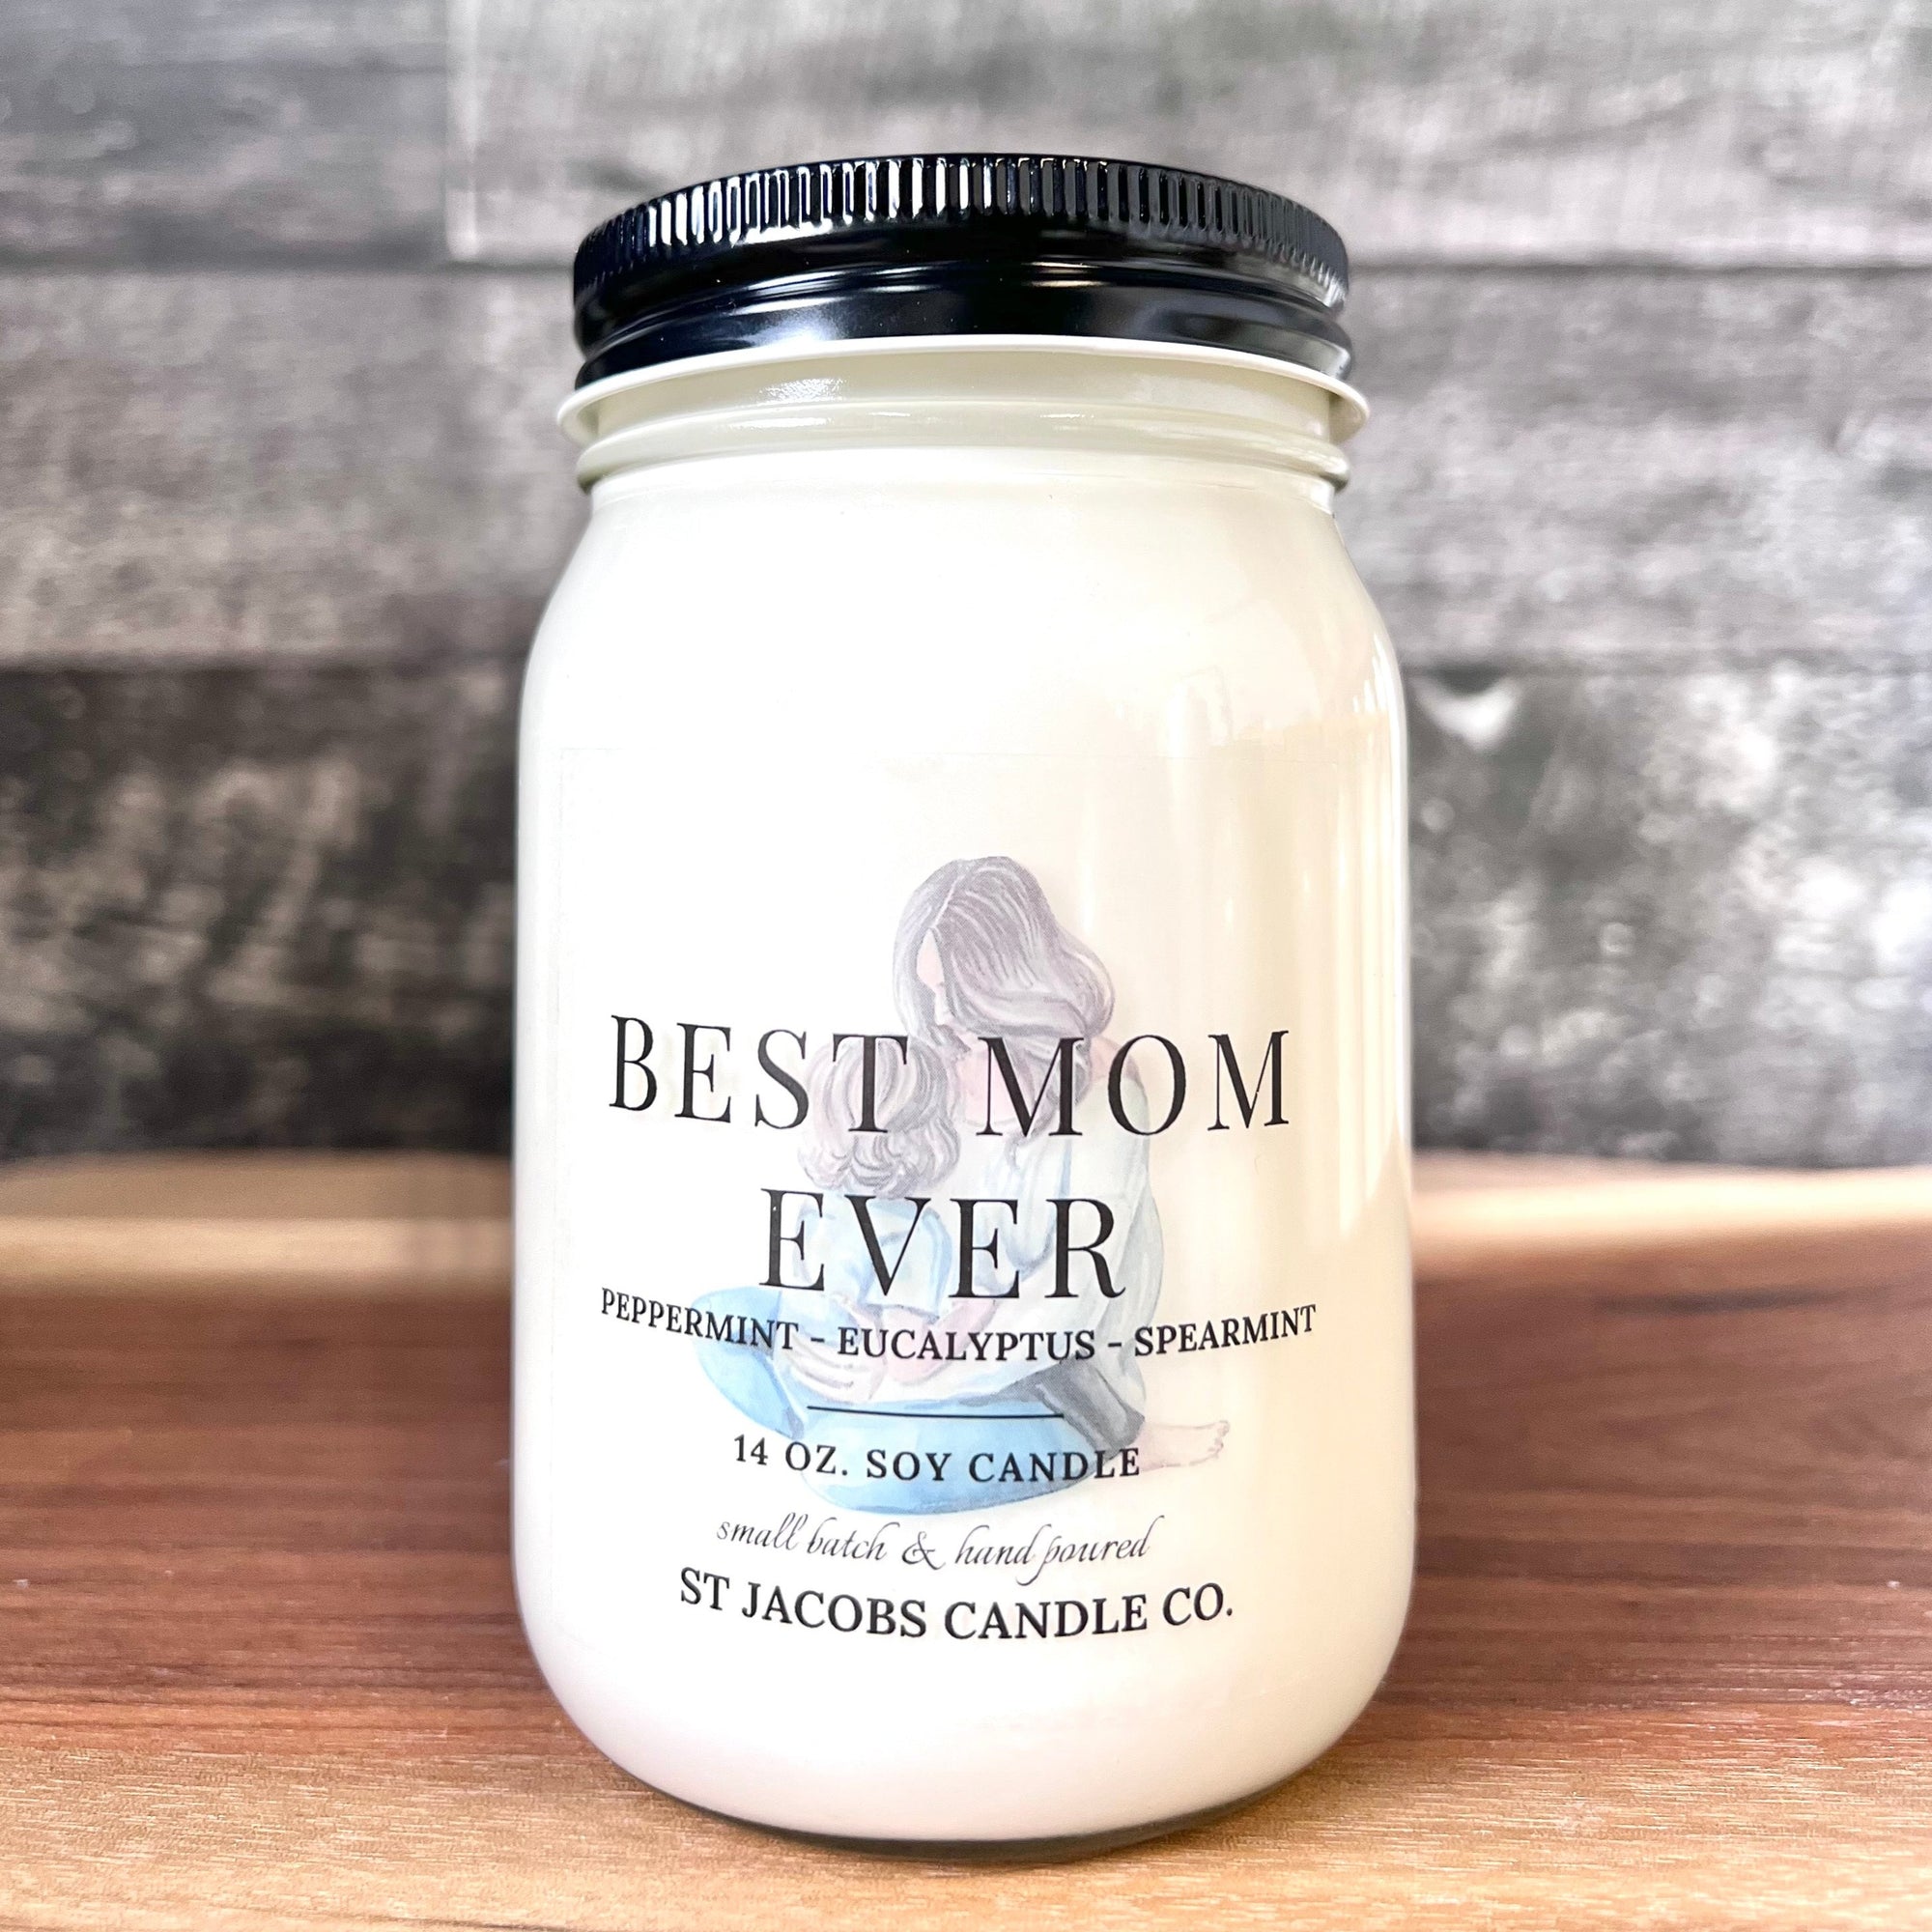 BEST MOM EVER - Natural Soy Candle 👩Mother's Day Collection💝